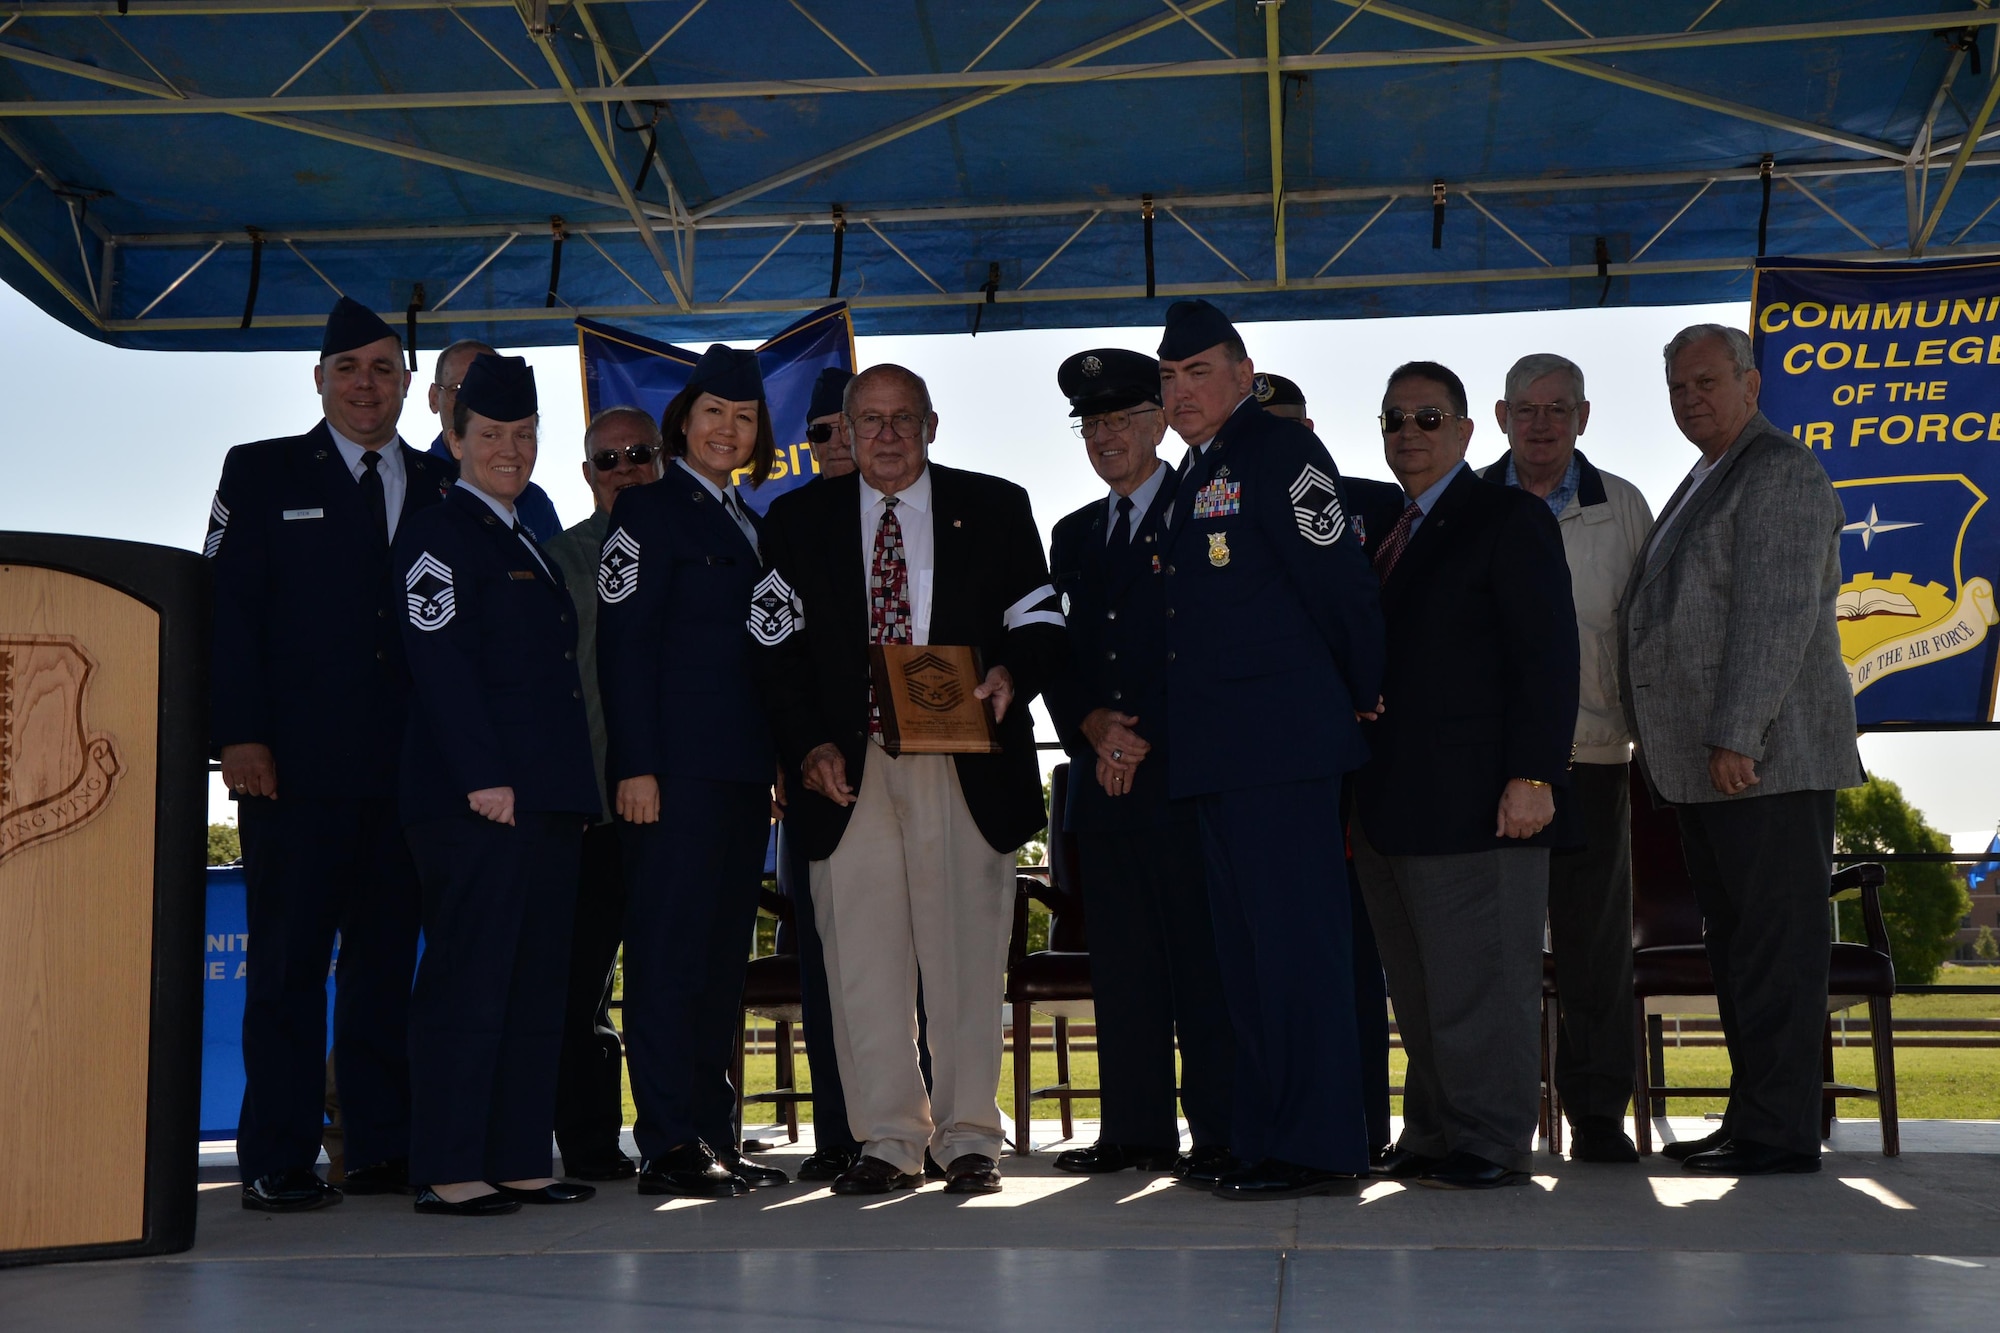 U.S. Air Force Col. Charlie E. Powell, retired, stands with Goodfellow chief master sergeants after receiving an honorary induction on Goodfellow Air Force Base, Texas, April 28, 2016.  Receiving an induction to the rank of chief master sergeant is one of the highest honors an enlisted group can bestow on a member. On his right, is 17th Training Wing command chief, Chief Master Sgt. JoAnne S. Bass, who would become the chief master sergeant of the Air Force in 2020.  (U.S. Air Force photo by Randall A. S. Moose)